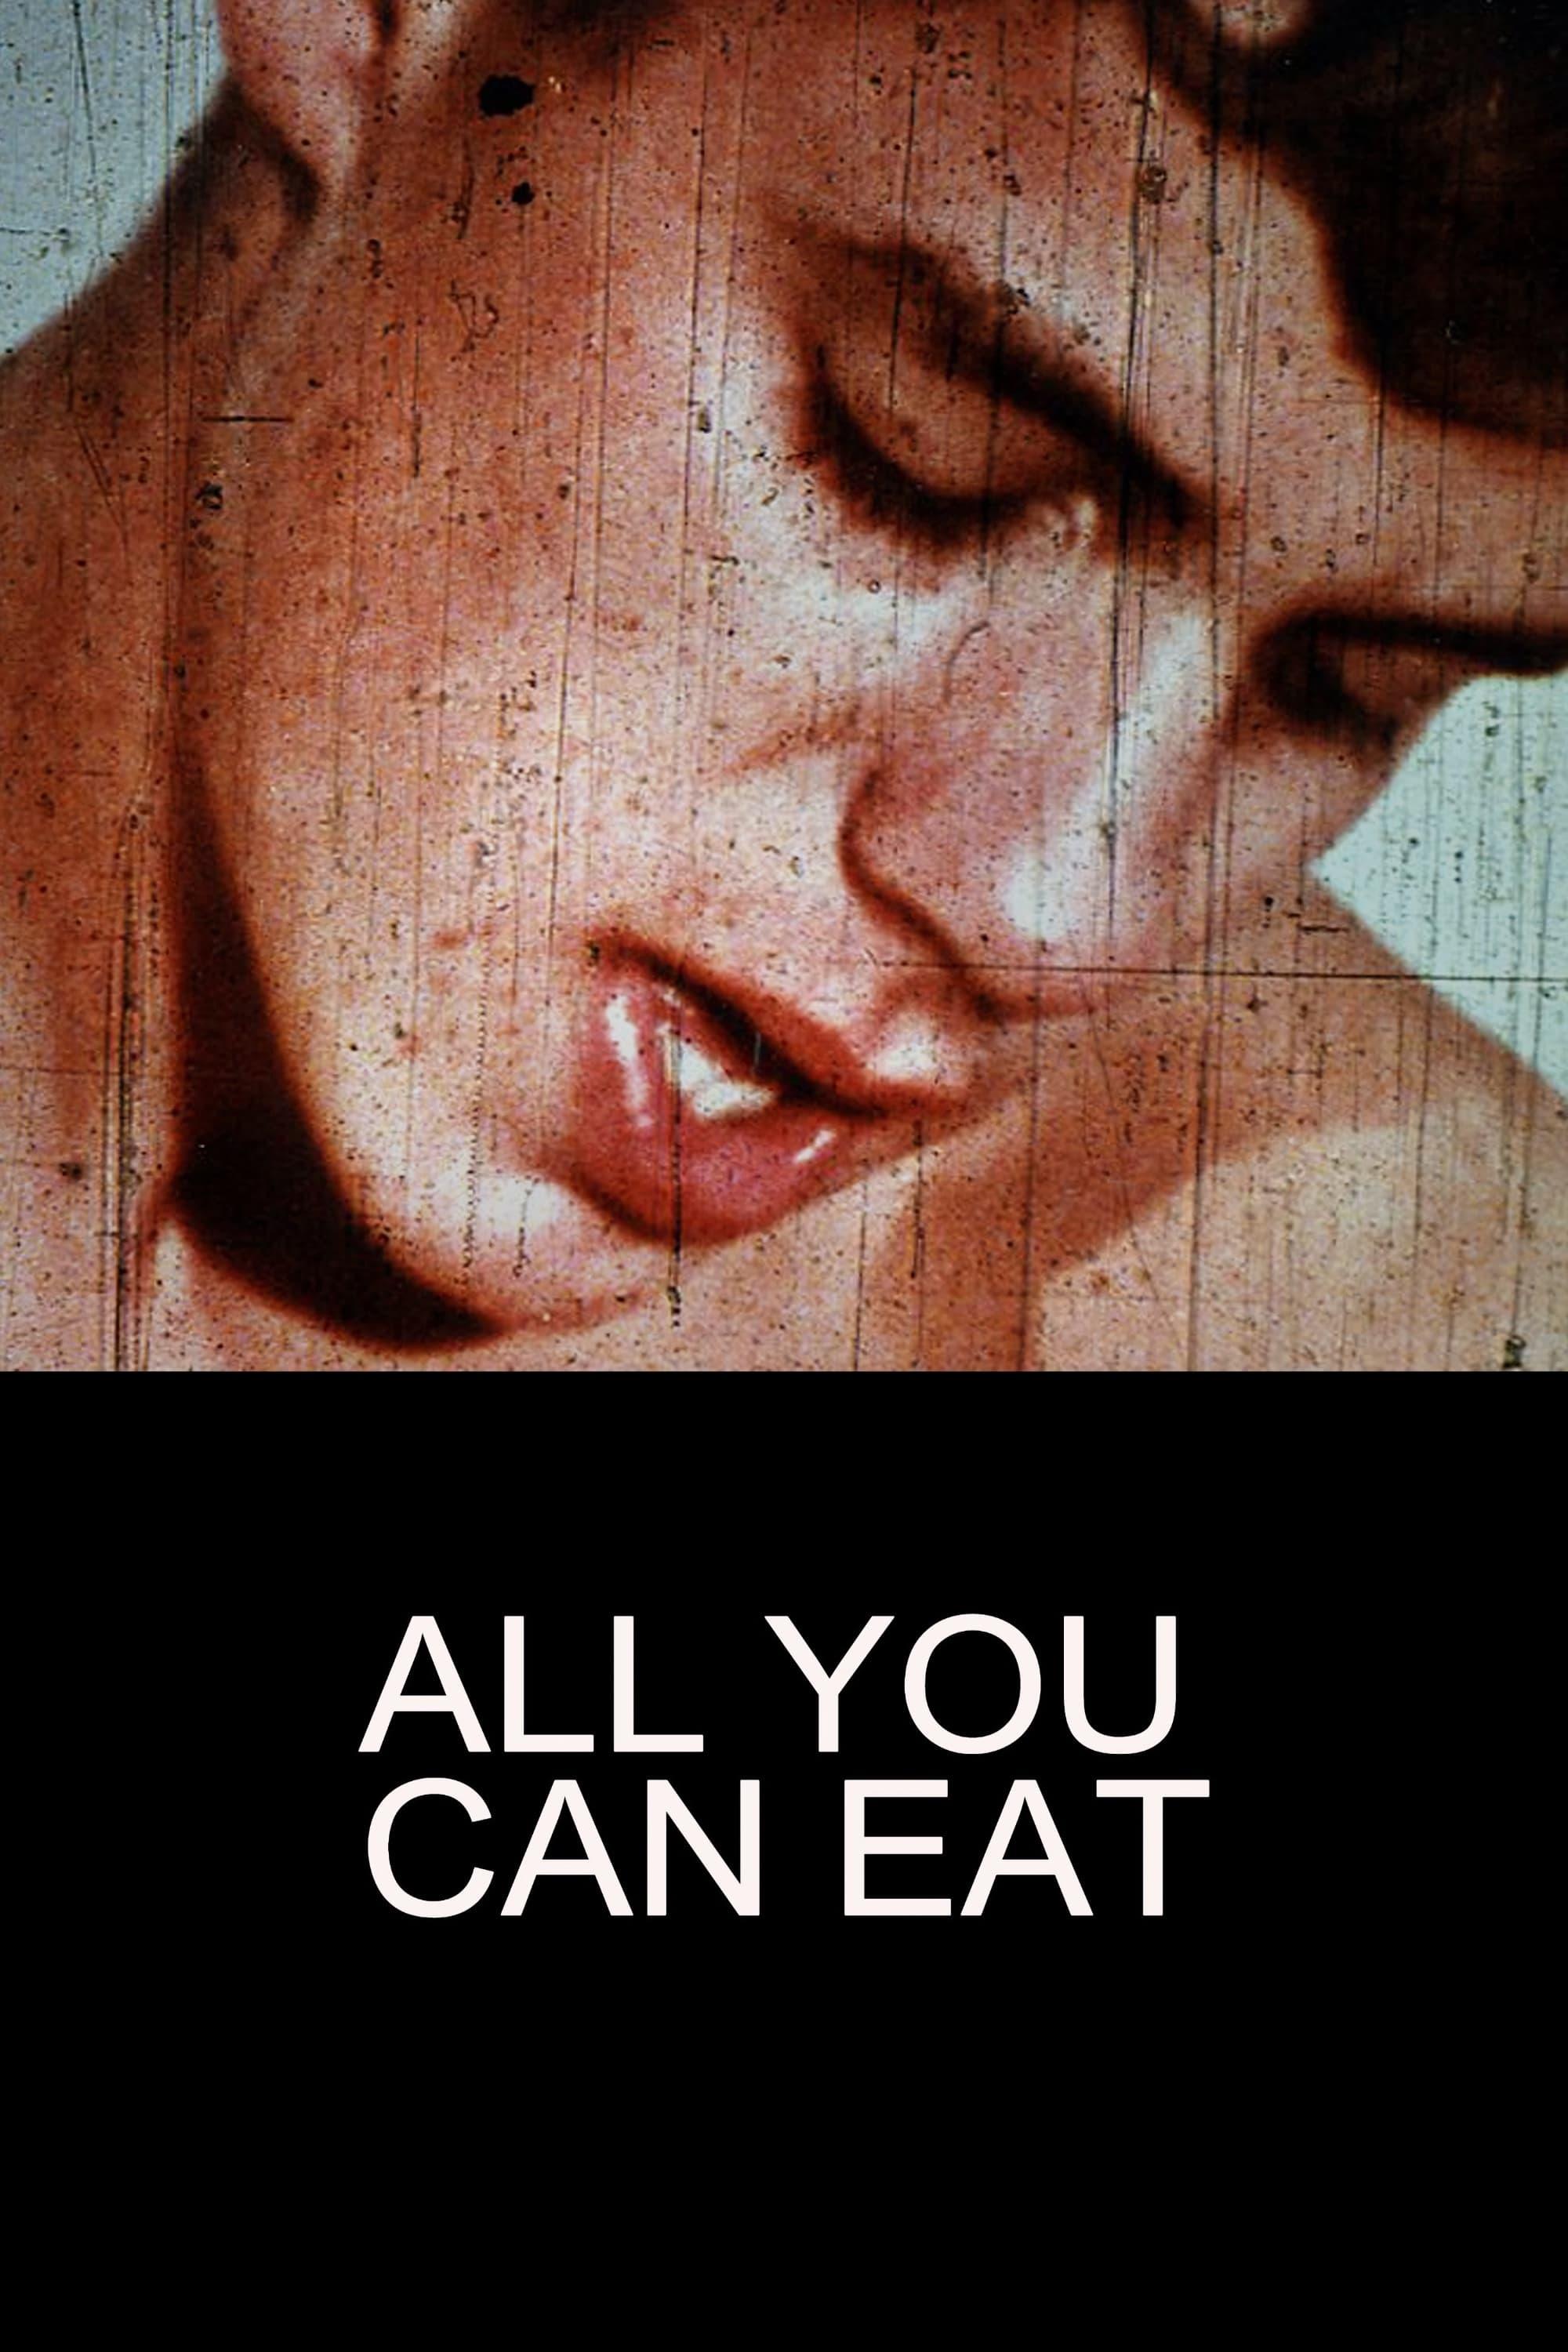 All You Can Eat poster